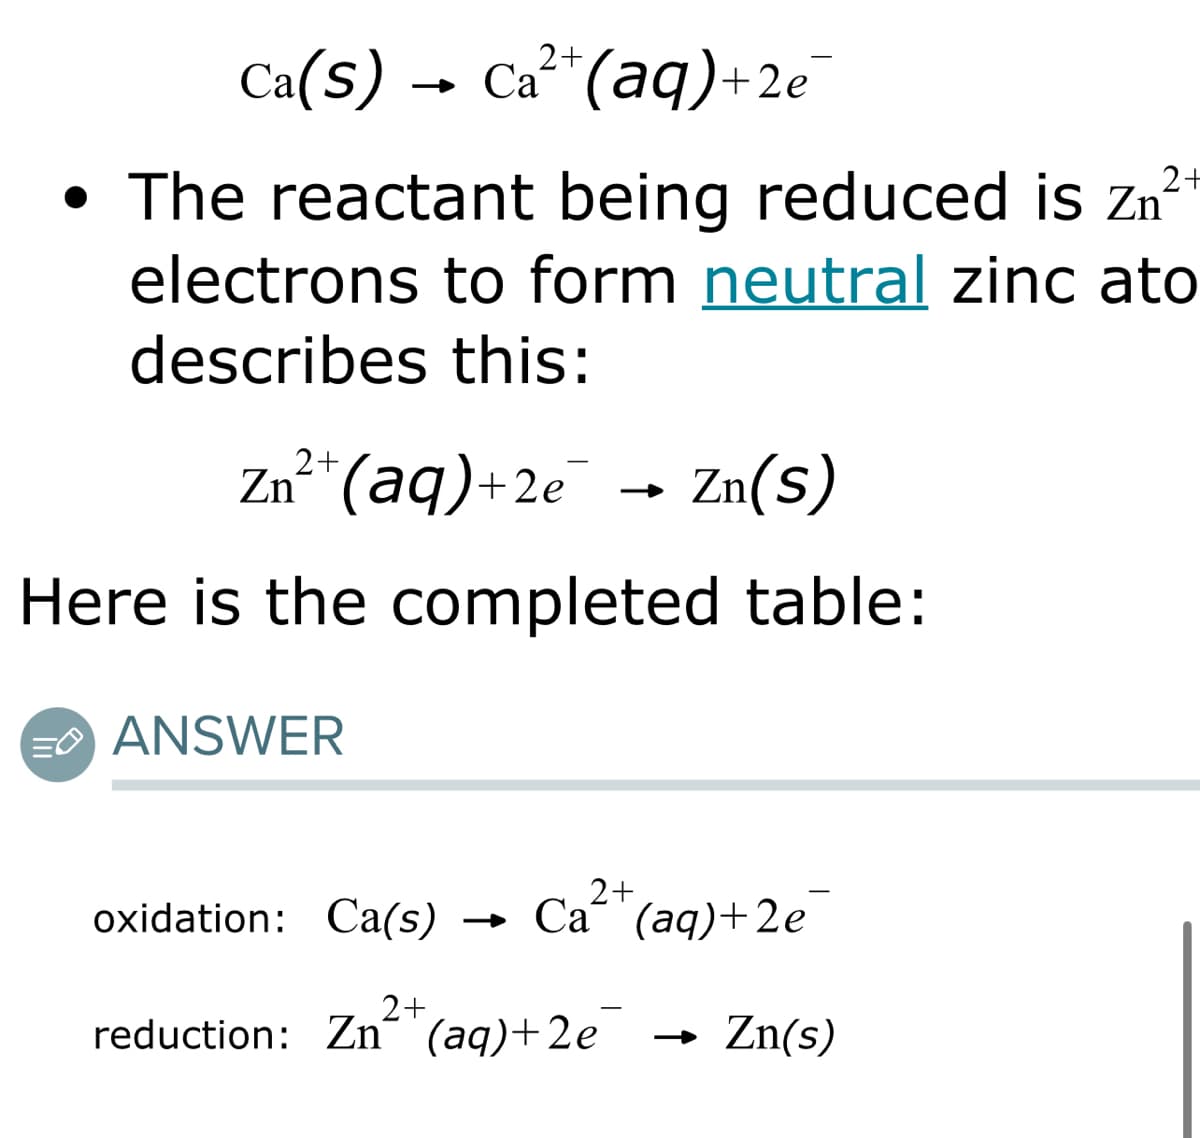 2+
Ca(s) Ca²+ (aq) +2e
2+
• The reactant being reduced is z
electrons to form neutral zinc ato
describes this:
2+
Zn²+ (aq) +2e
Zn(S)
Here is the completed table:
EANSWER
2+
oxidation: Ca(s) → Ca“ (aq)+2e
2+
reduction: Zn(aq)+2e
Zn(s)